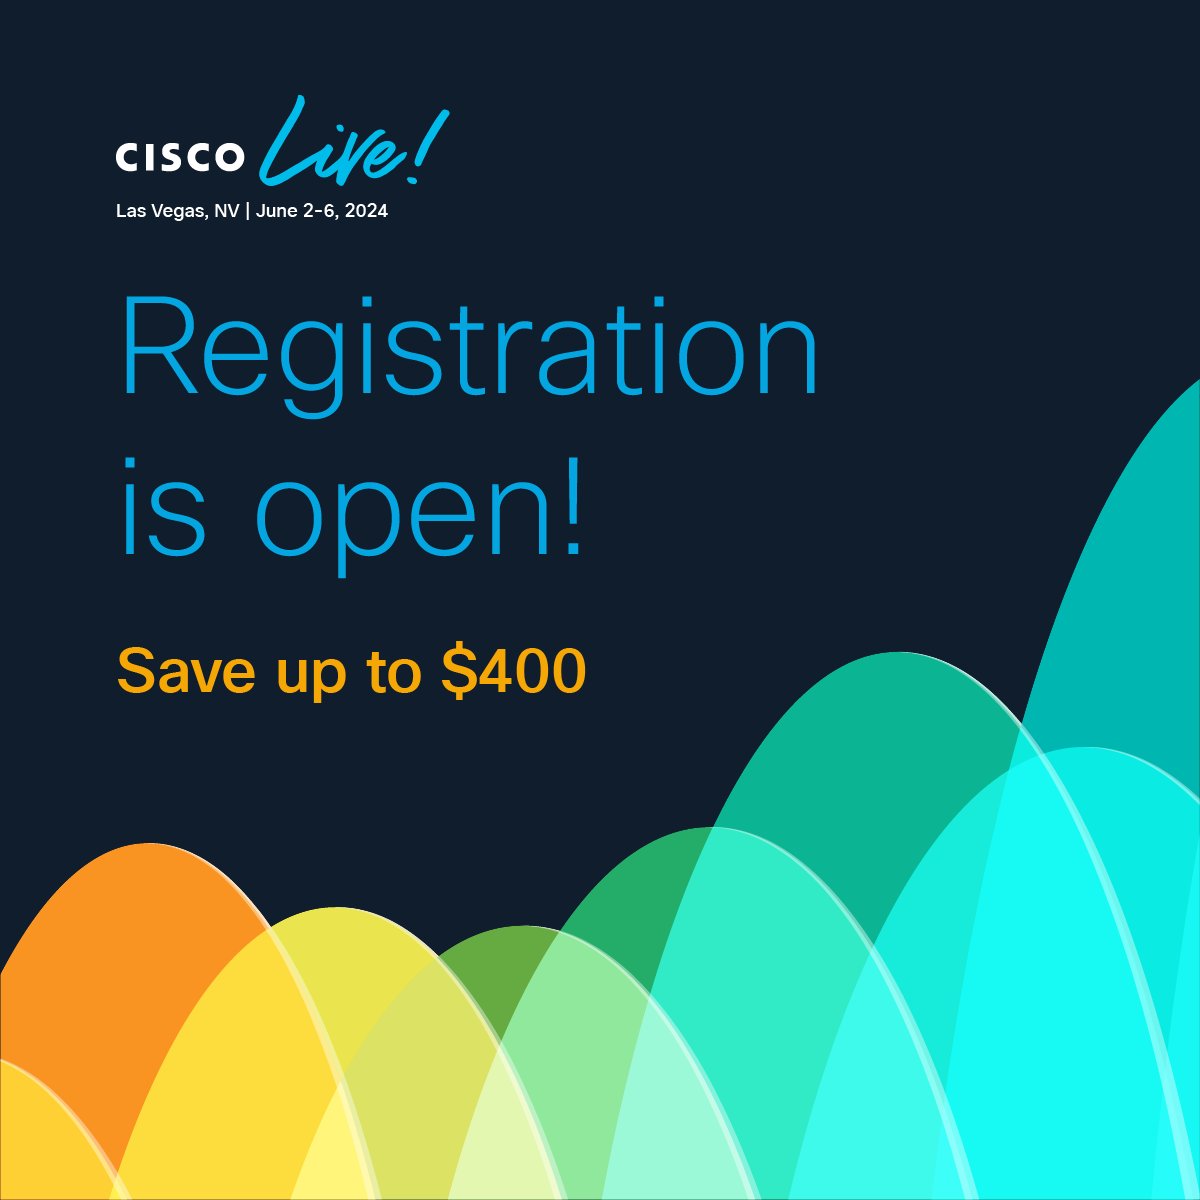 🚨BIG SAVINGS ALERT!🚨 Who doesn’t love a discount? It’s the final day to register for #CiscoLive and save up to $400 – so sign up now if you haven’t already! cs.co/CL2024